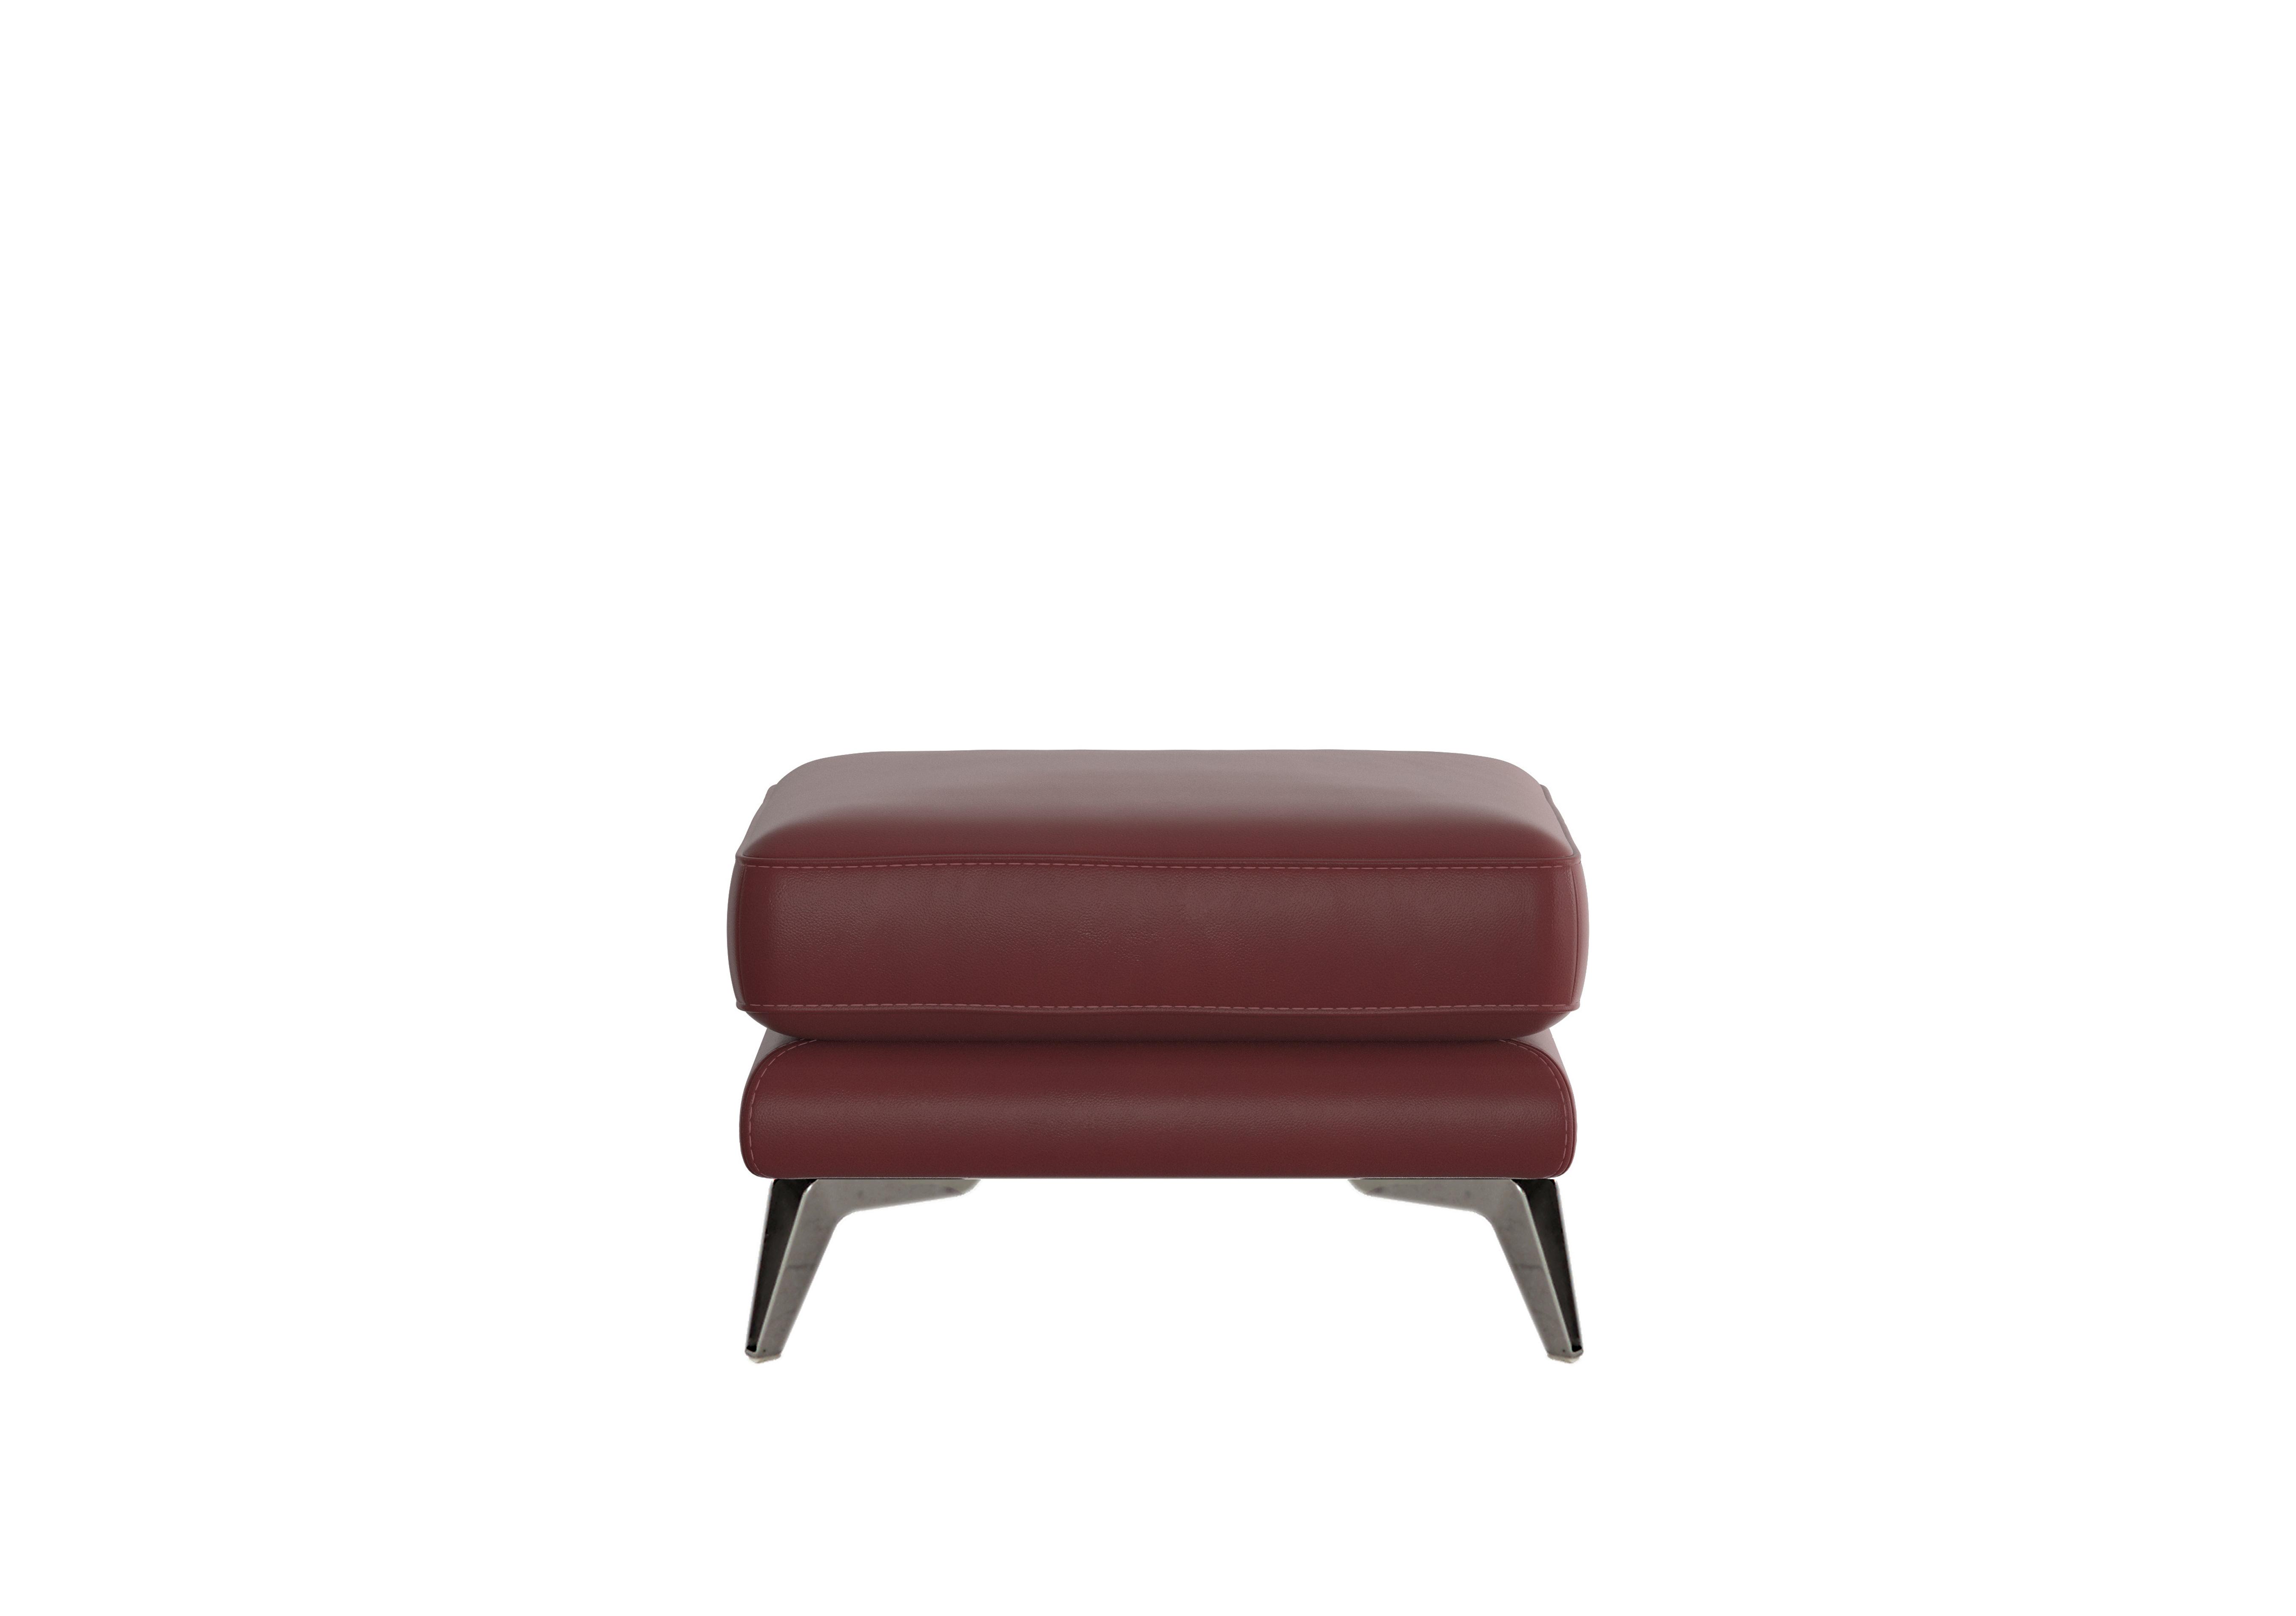 Contempo Leather Footstool in Bv-035c Deep Red on Furniture Village